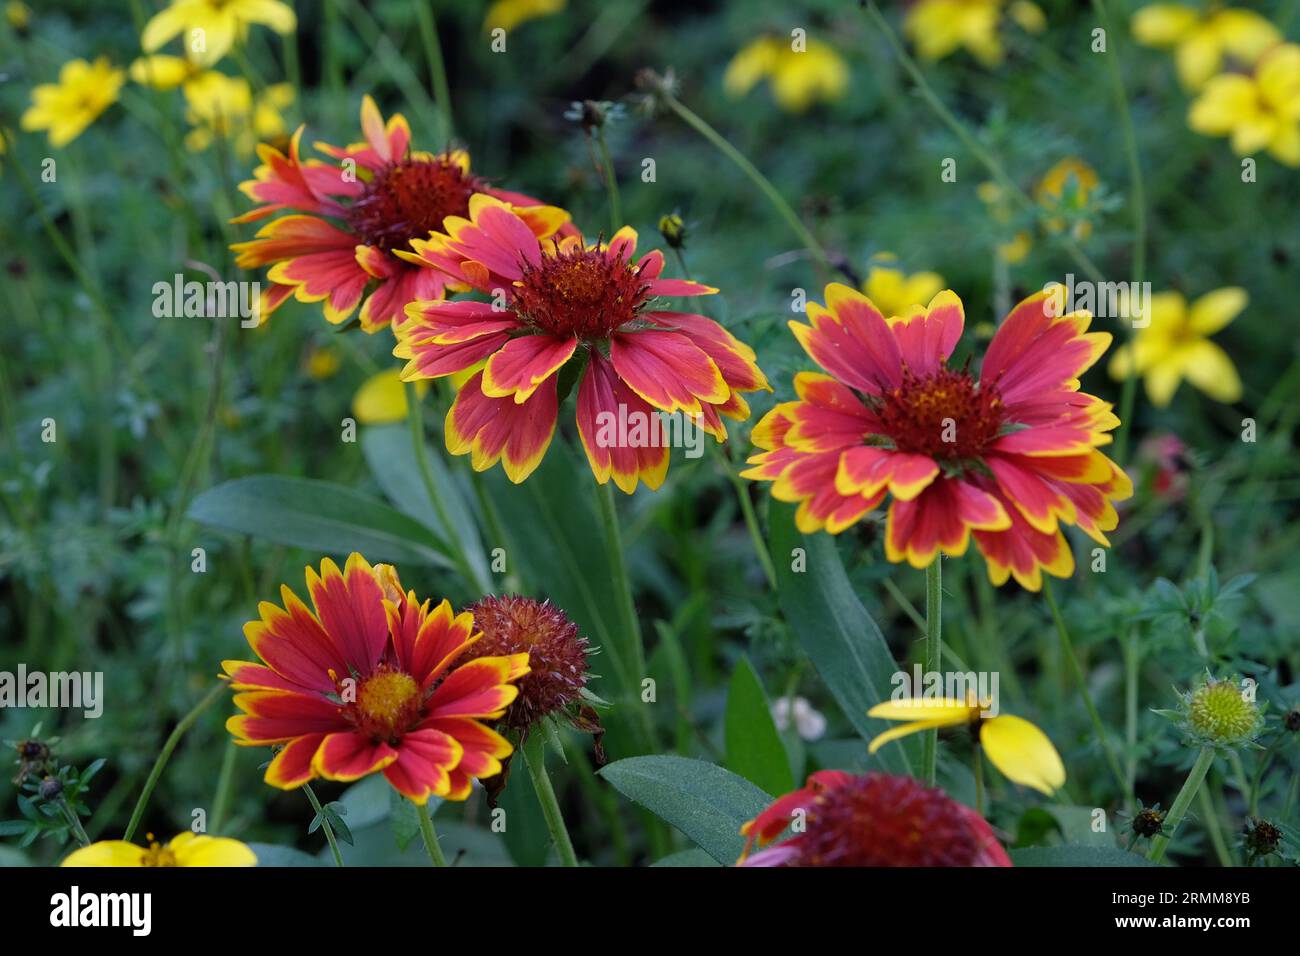 Red with a yellow fringe Gaillardia pulchella, also known as firewheel, Indian blanket, Indian blanket flower, in bloom. Stock Photo